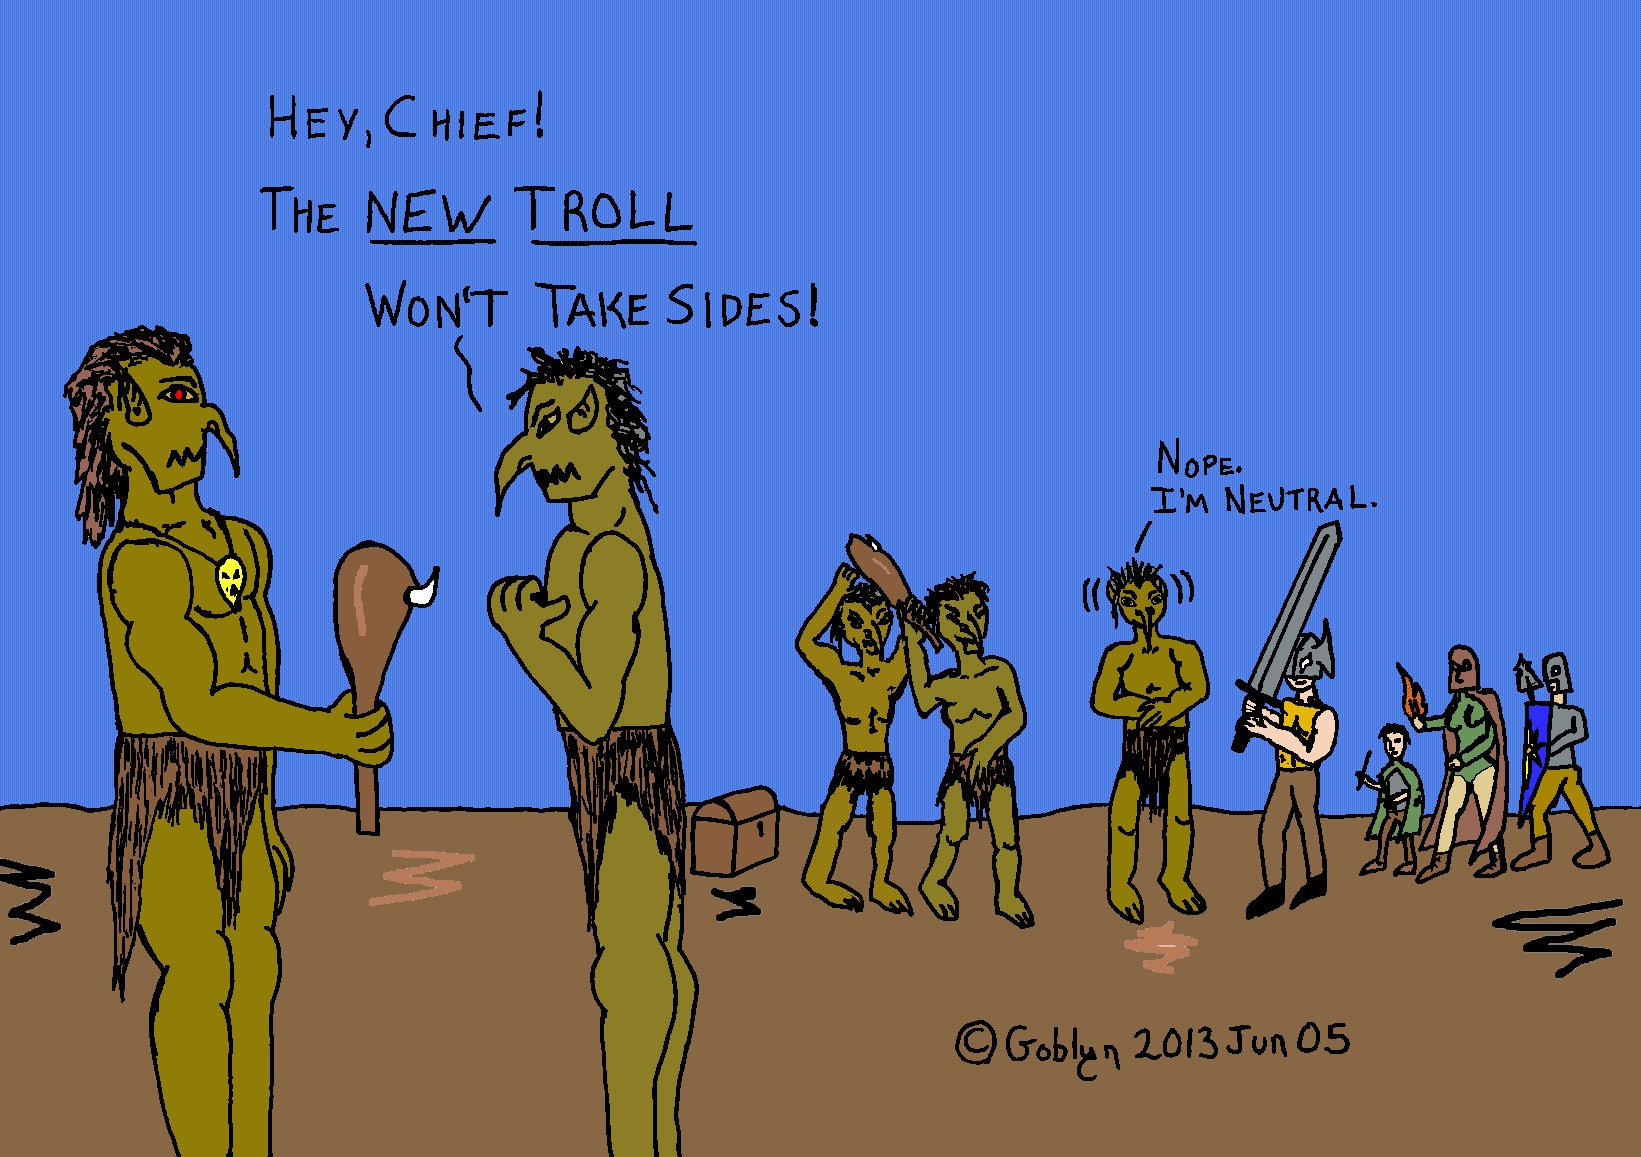 The New Troll is neutral. Dungeons & Dragons Comics.